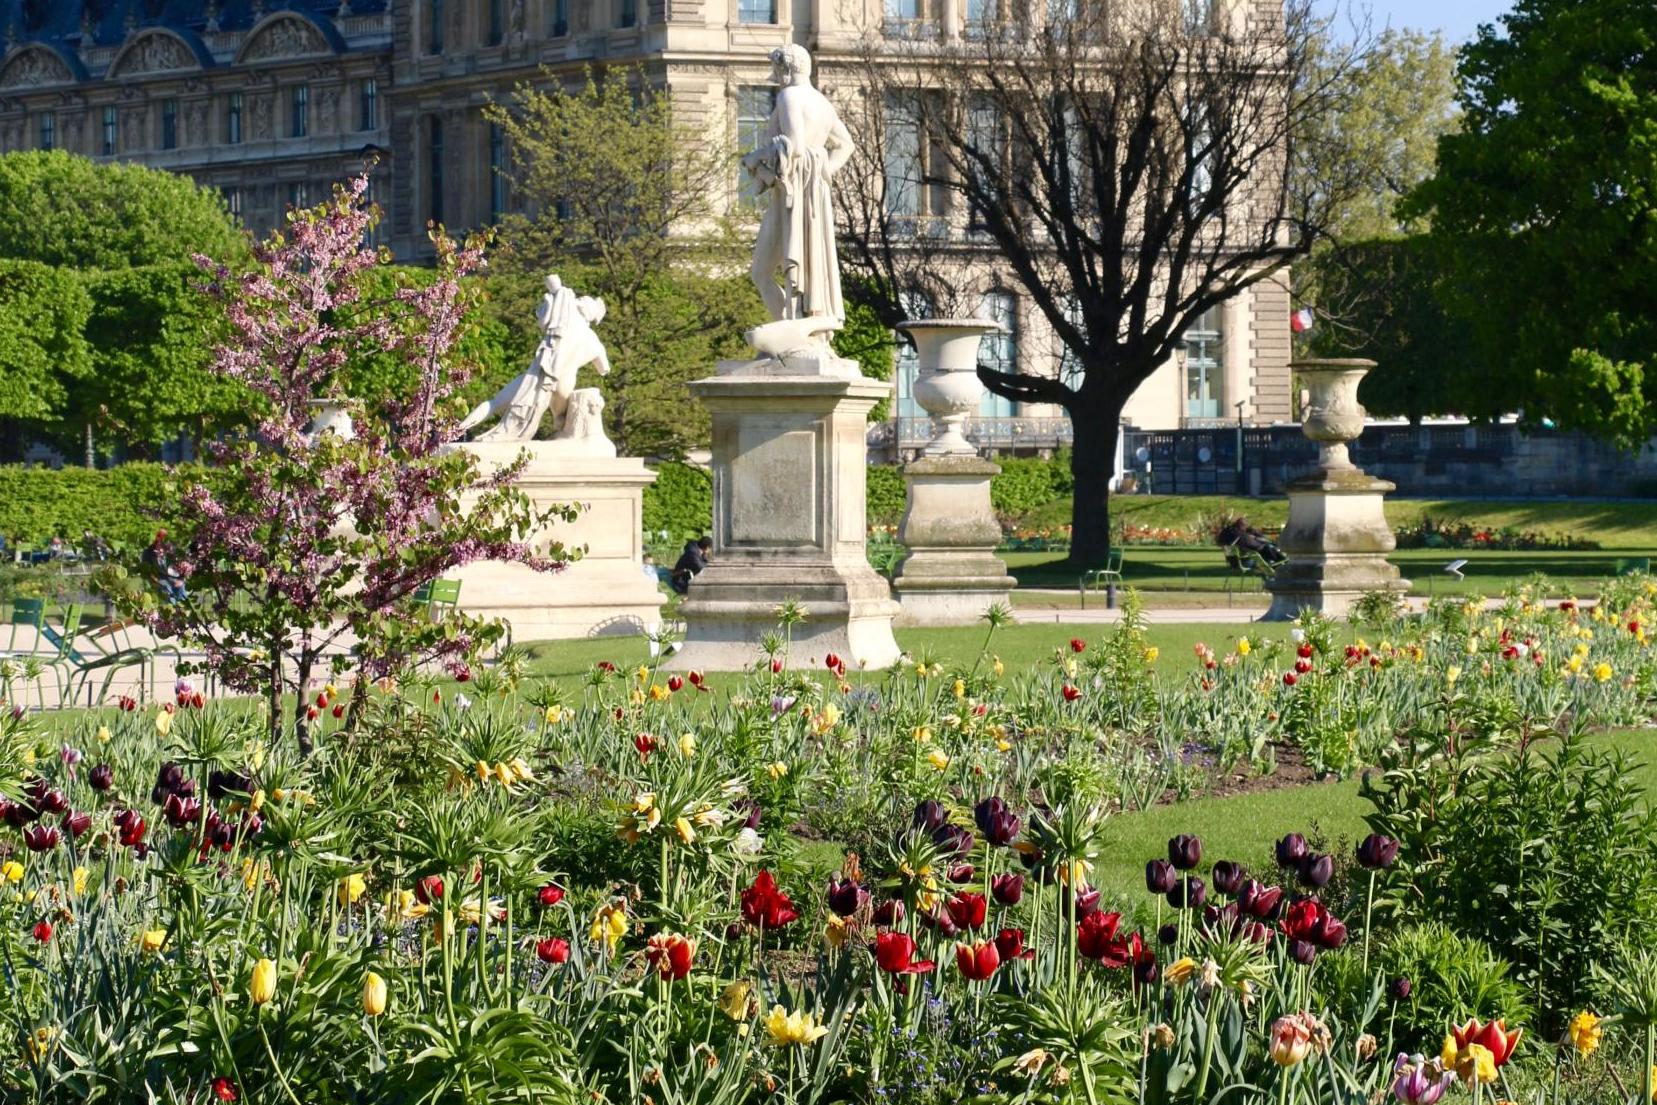 The Jardin du Luxembourg is over four centuries old